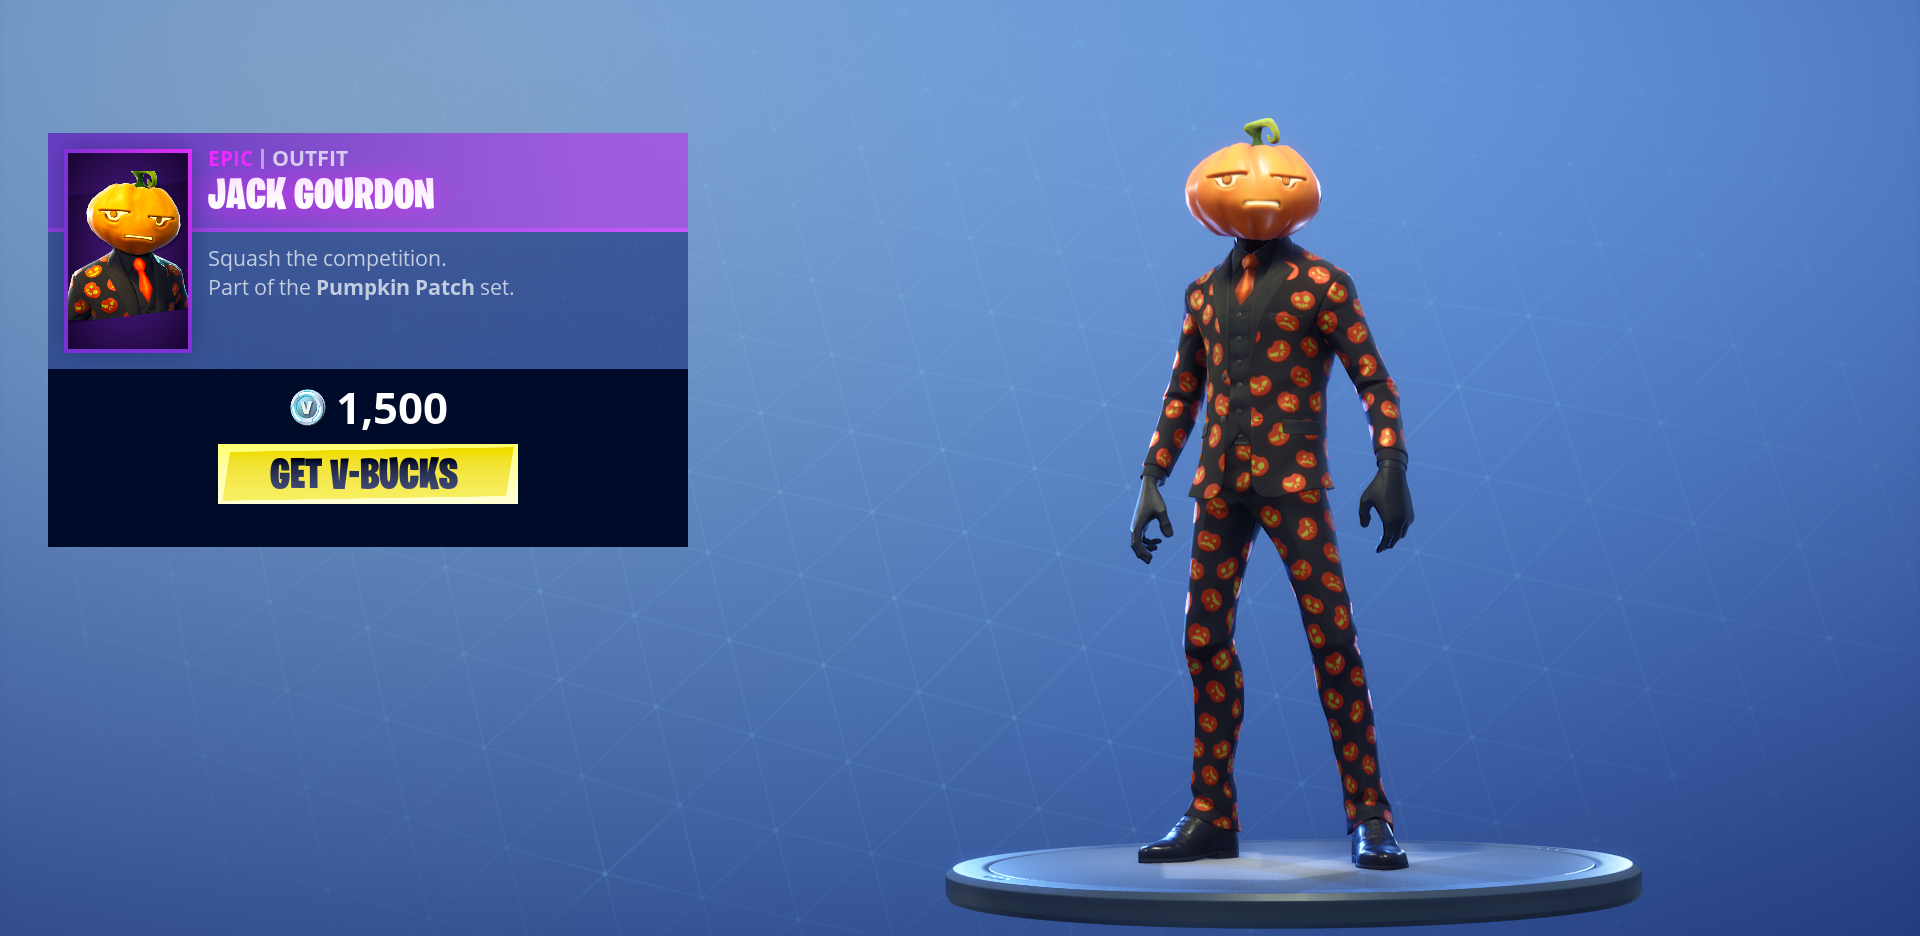 Jack Gourdon outfit available now | Fortnite News - 1920 x 936 png 1407kB